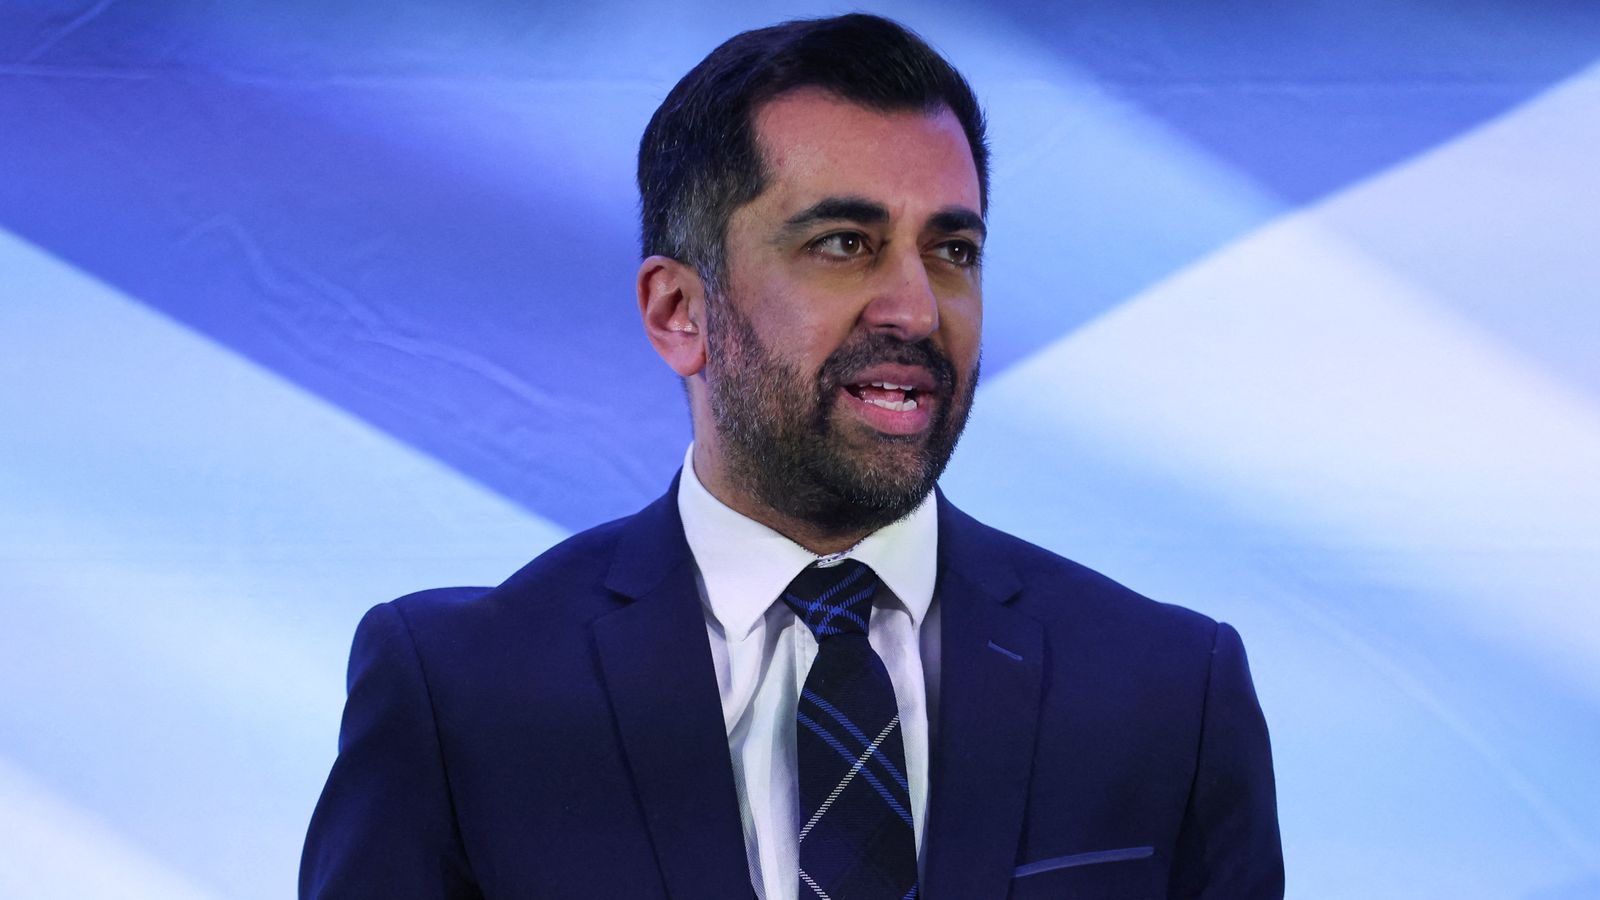 Humza Yousaf announced as new Scottish National Party leader replacing Nicola Sturgeon